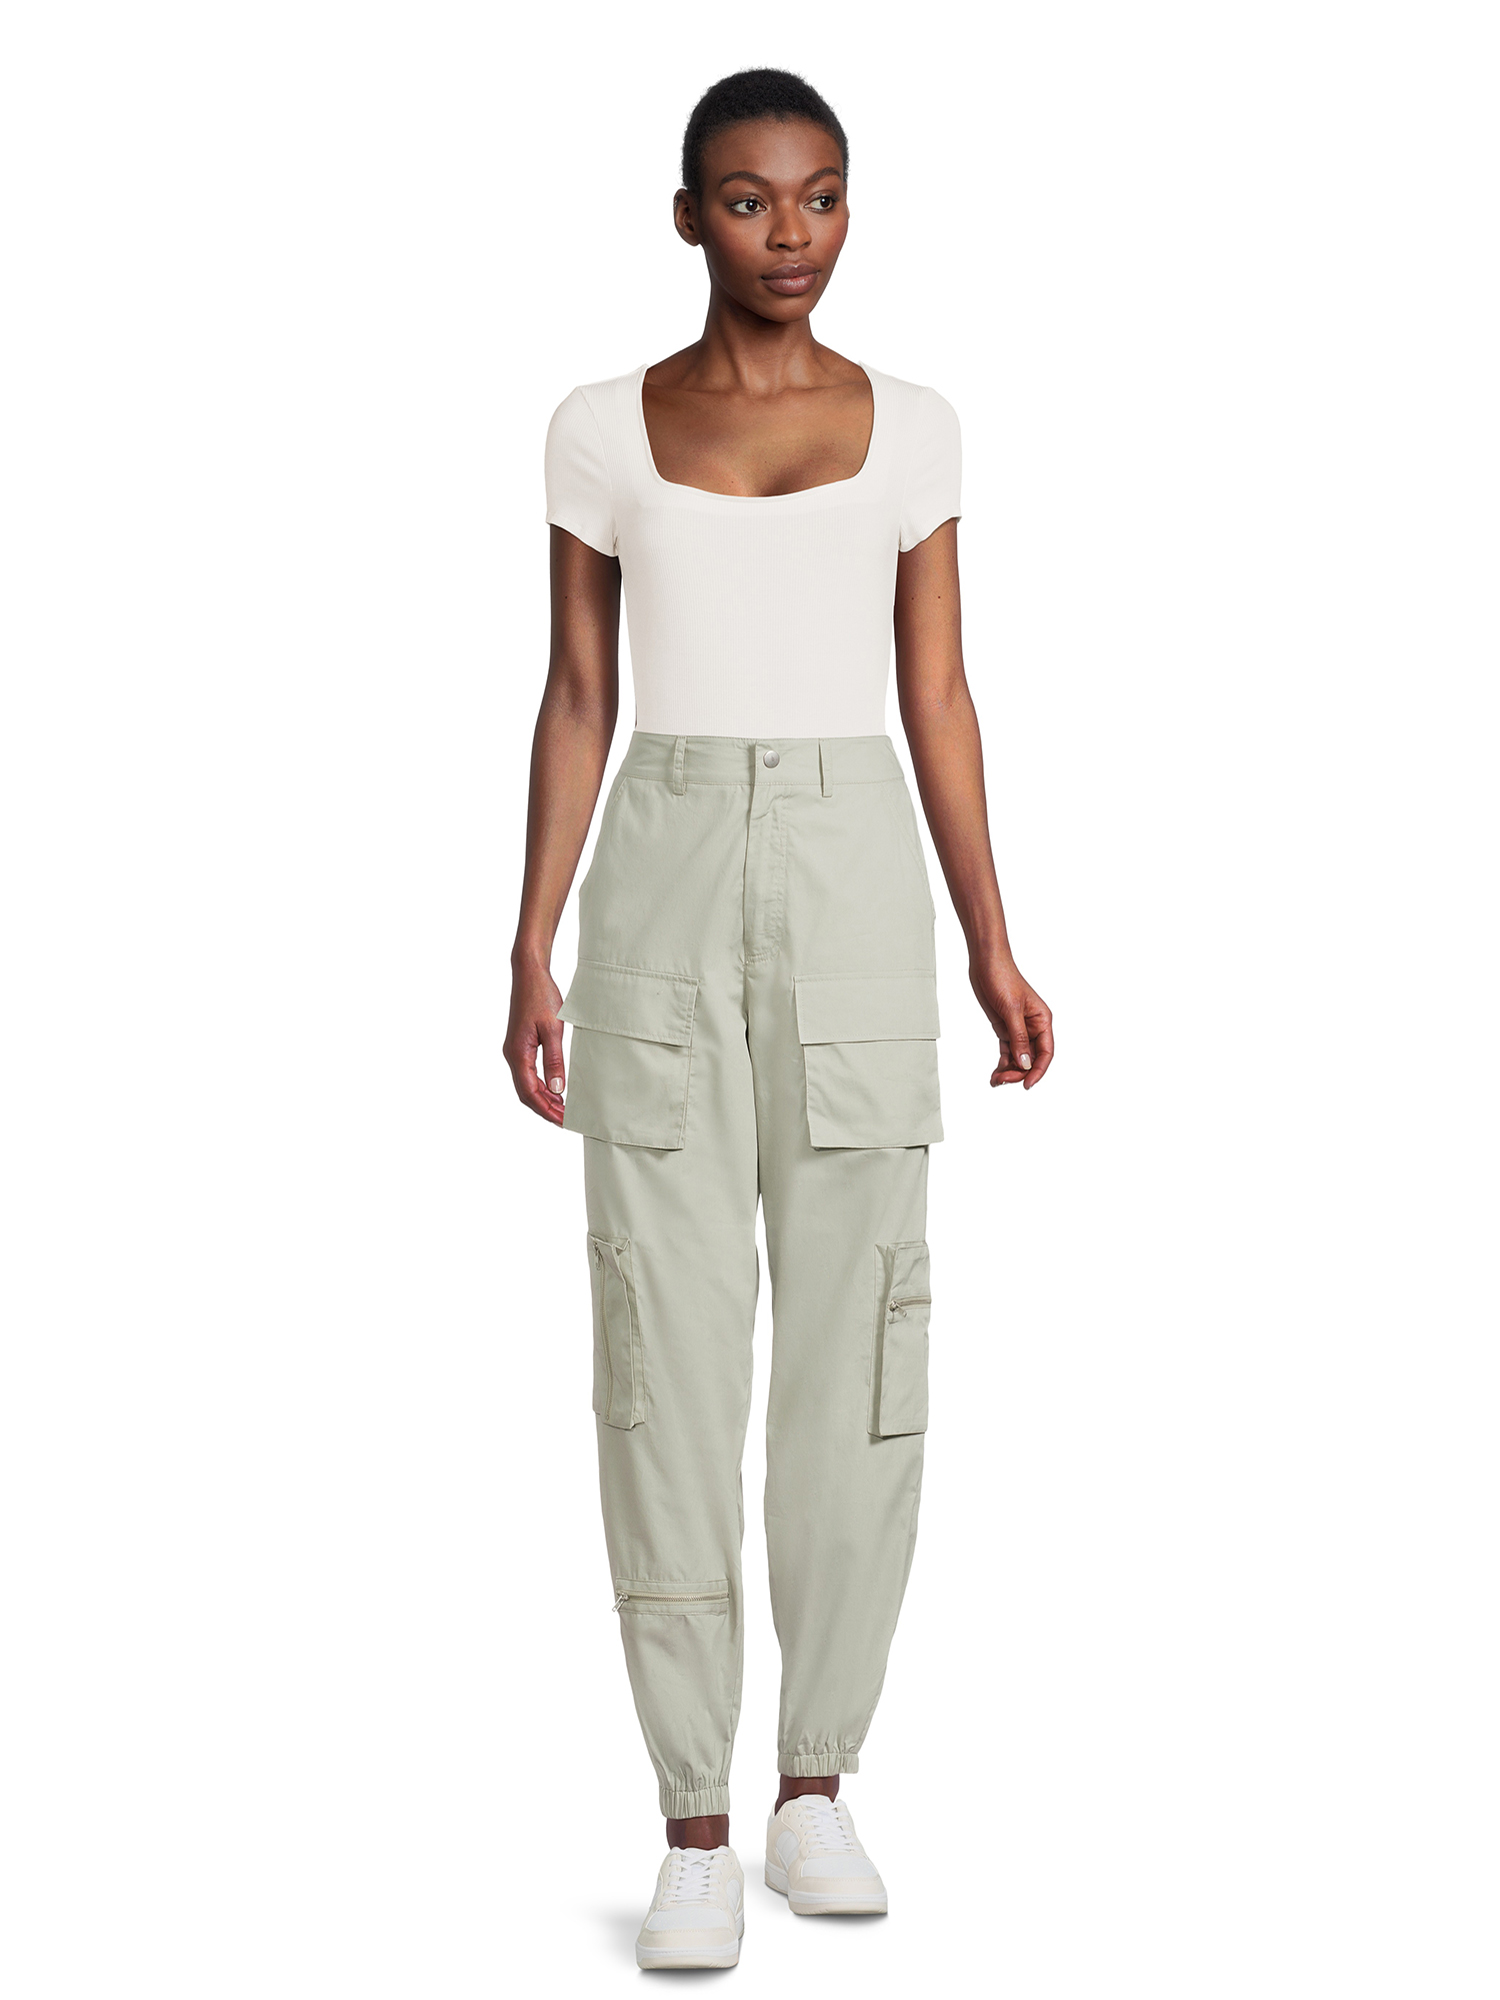 Liv & Lottie Juniors Cargo Pants with Zippers, Sizes S-XL - image 2 of 5